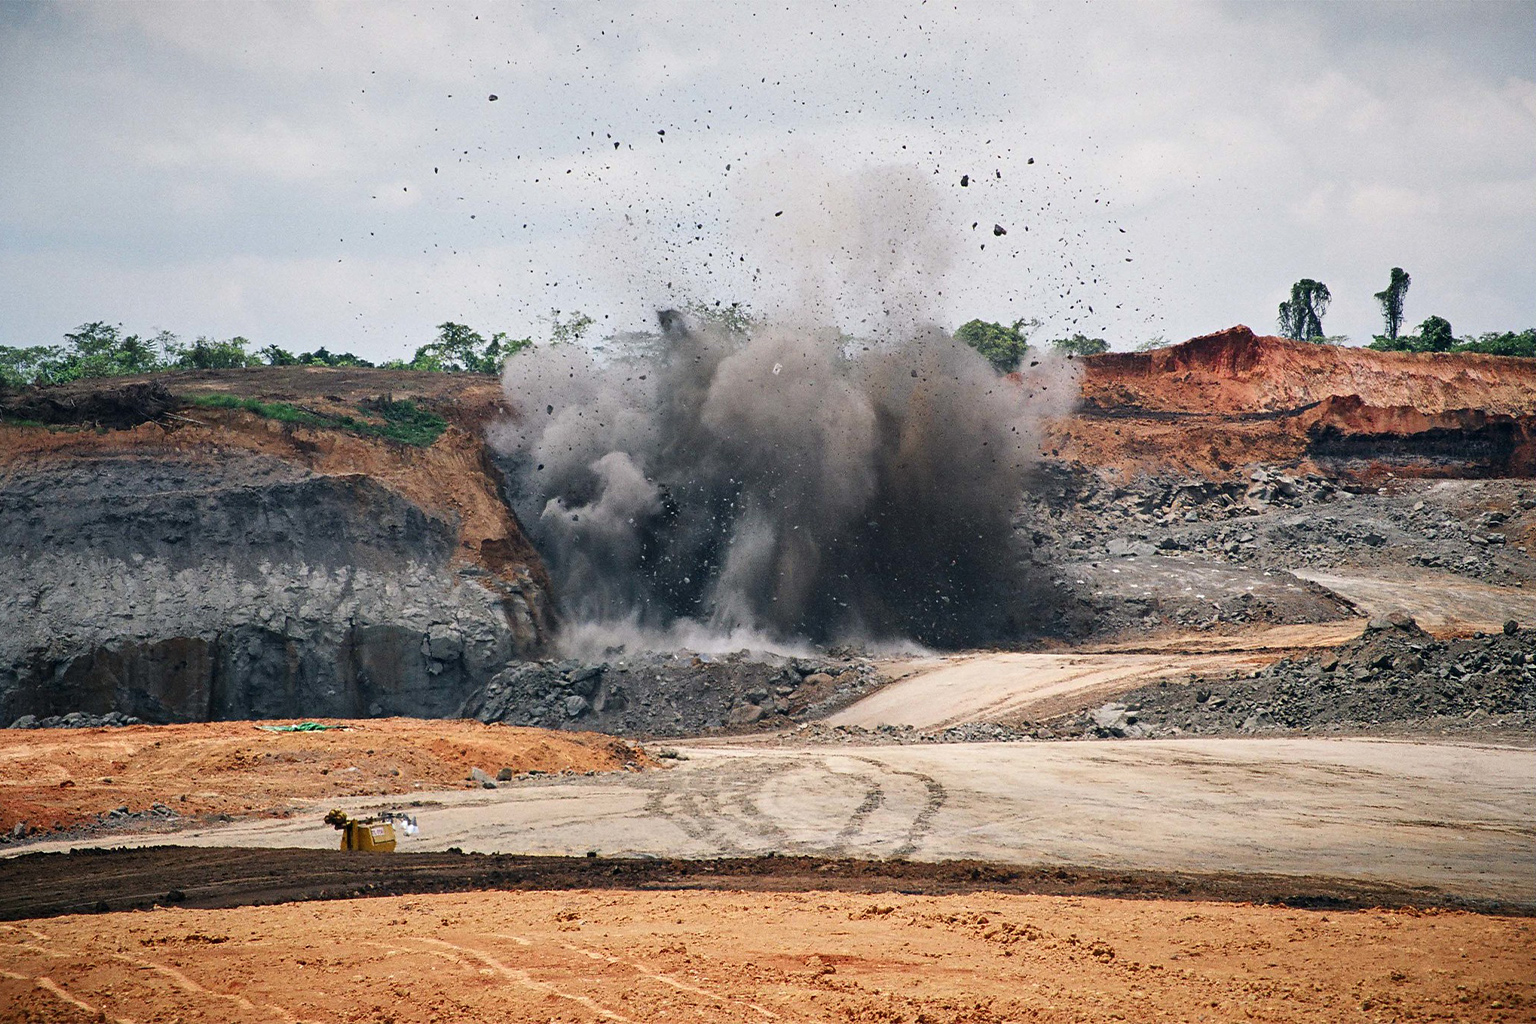 A coal mine site being cleared with dynamite to access the vein of coal